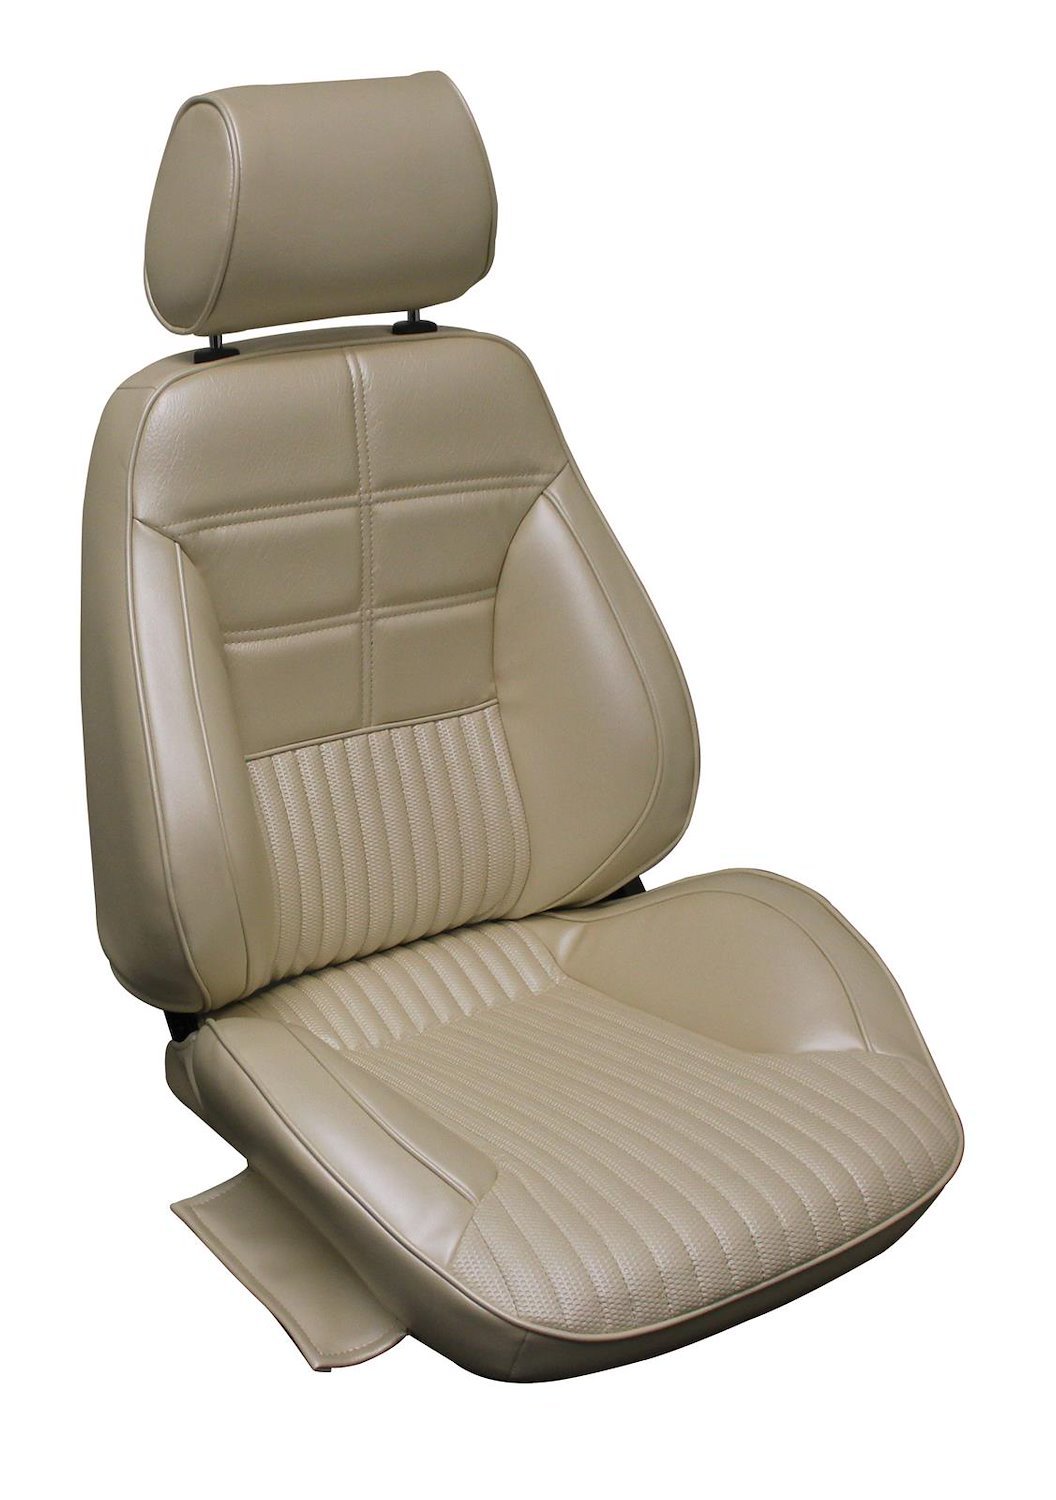 1970 Ford Mustang Deluxe and Grande Interior Vermillion Touring II Preassembled Reclining Front Bucket Seats